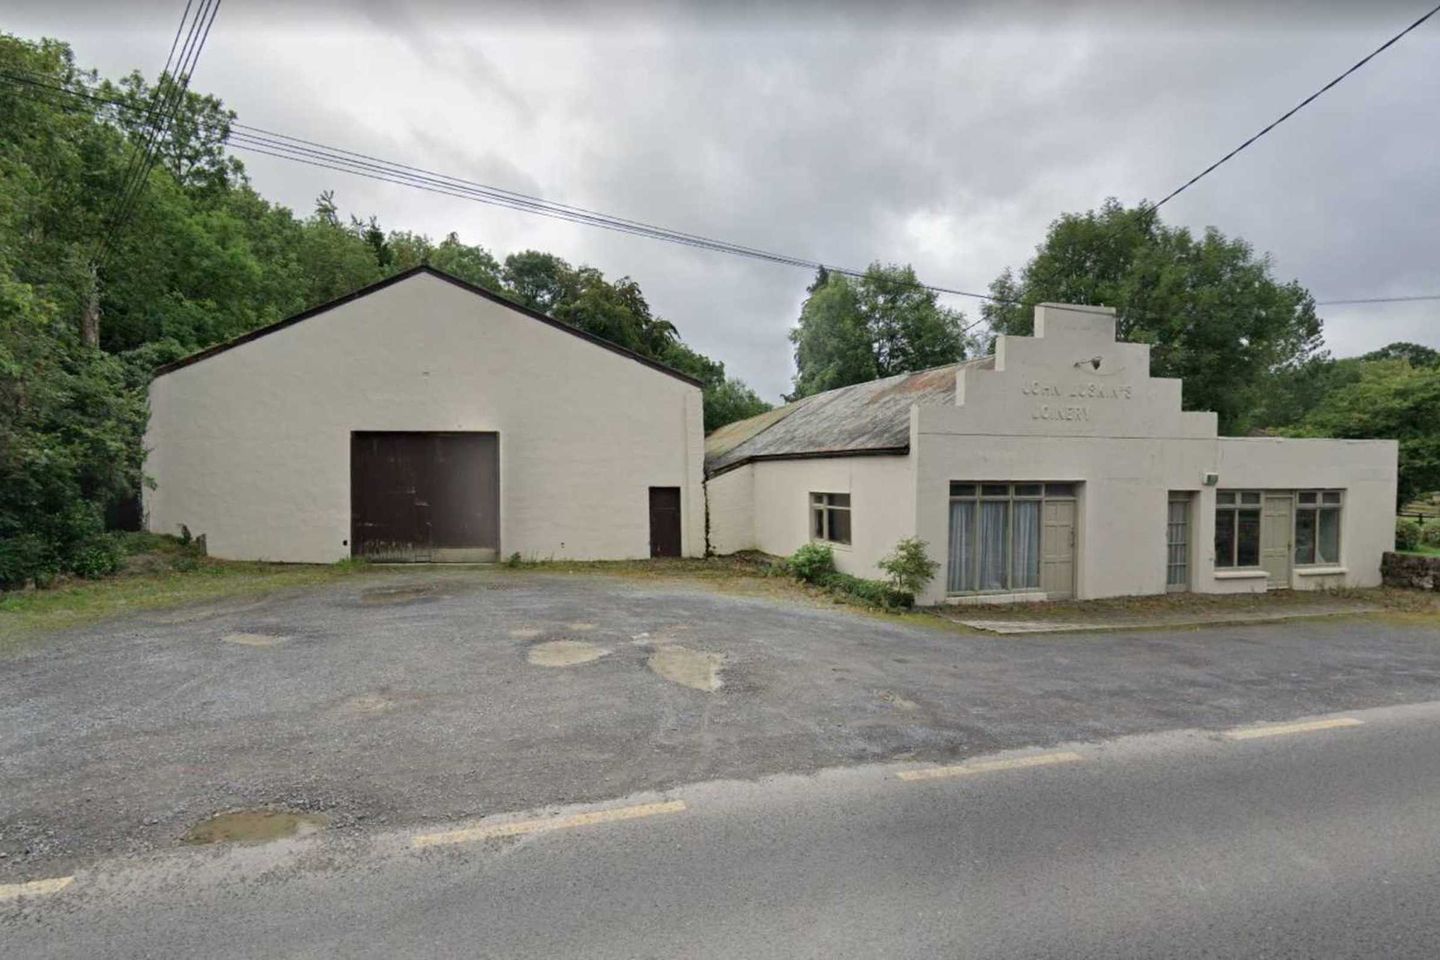 Luskins Workshop, Nymphsfield, Cong, Co. Mayo